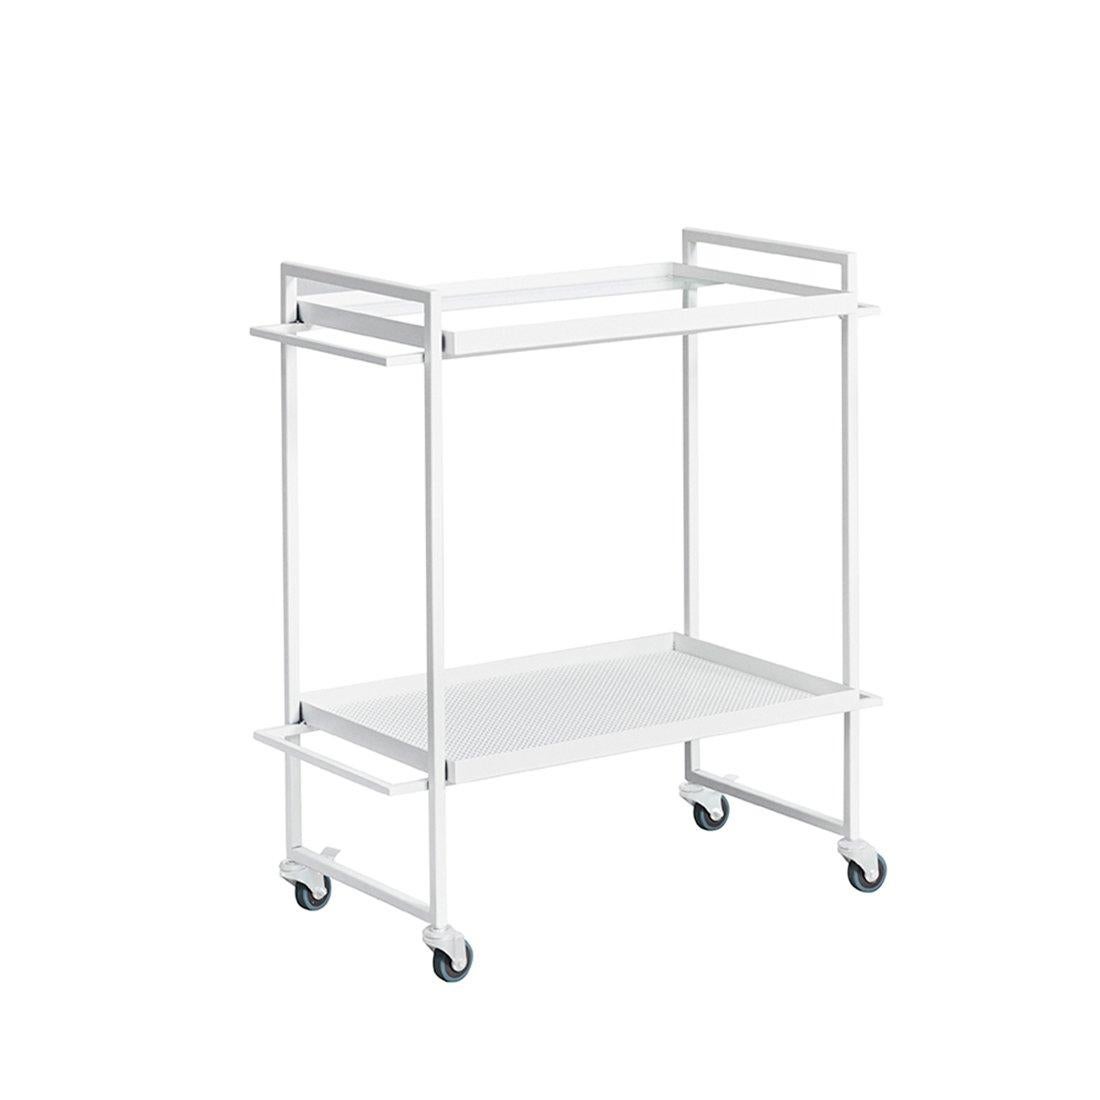 Bauhaus trolley by Kristina Dam Studio
Materials: White powder-coated steel and glass.
Also available in different colors.
Dimensions: 35 x 72 x H 77cm.

The Modernist furniture collection takes notions of modern design and yet the distinctive